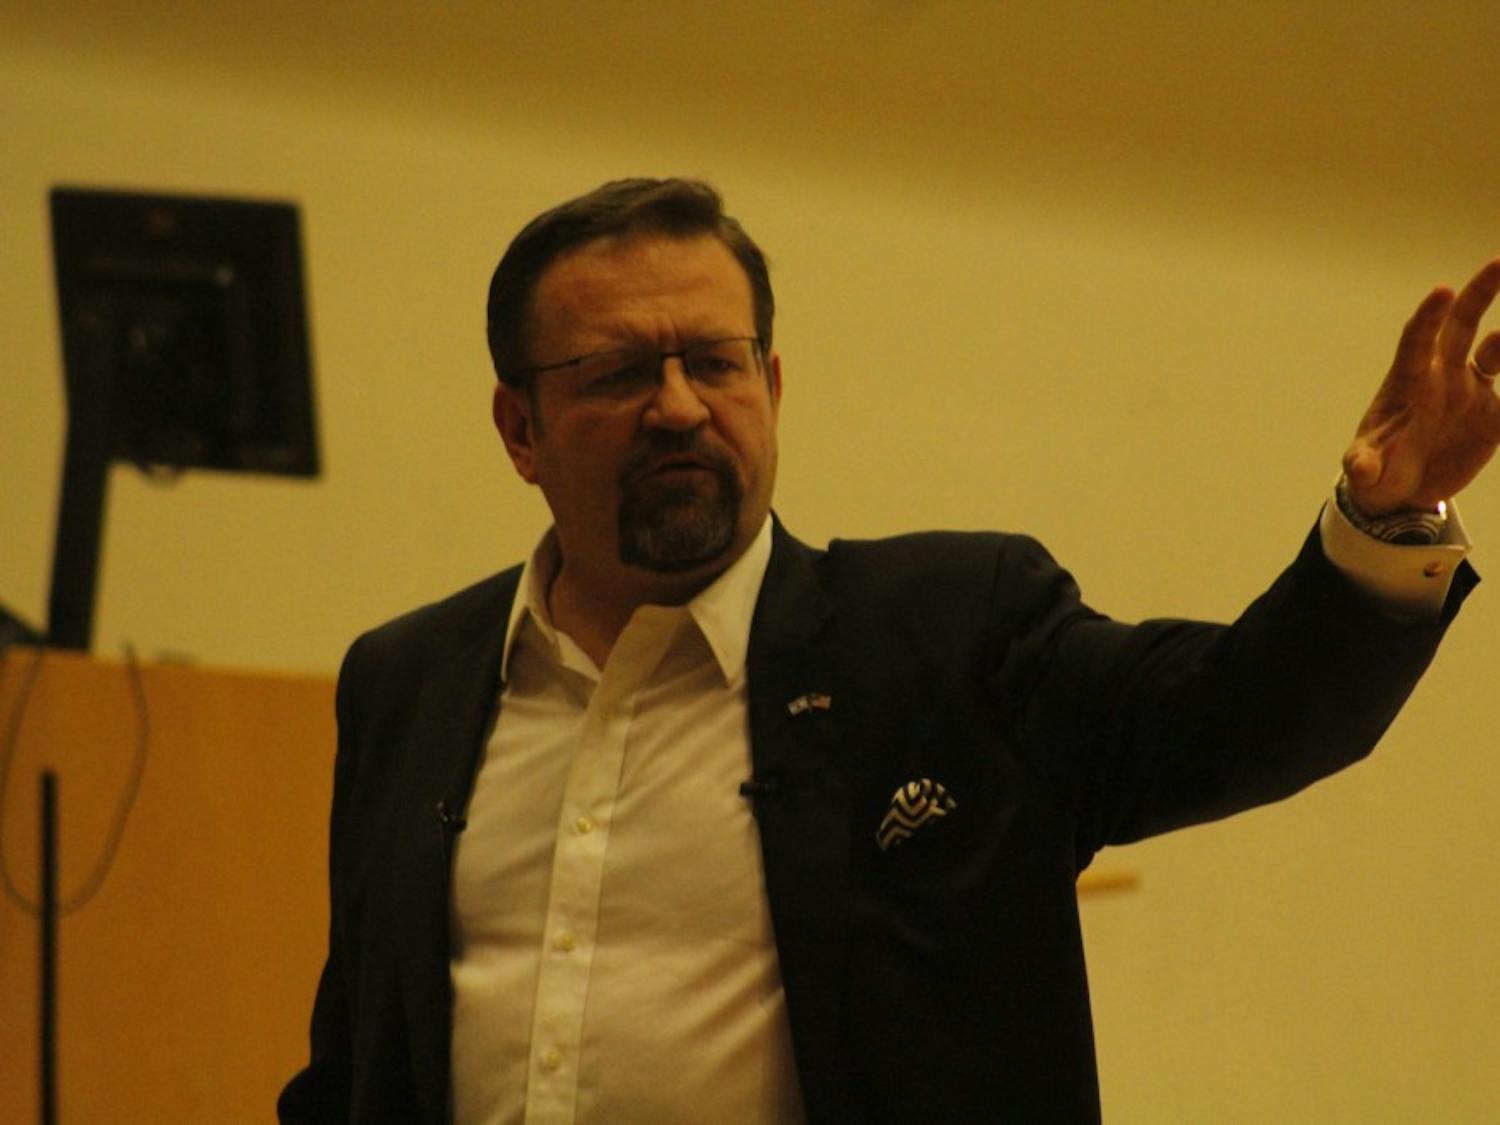 Sebastian Gorka, former advisor to President Trump, spoke about his experience in the White House as well as what the American people can expect for the future. 